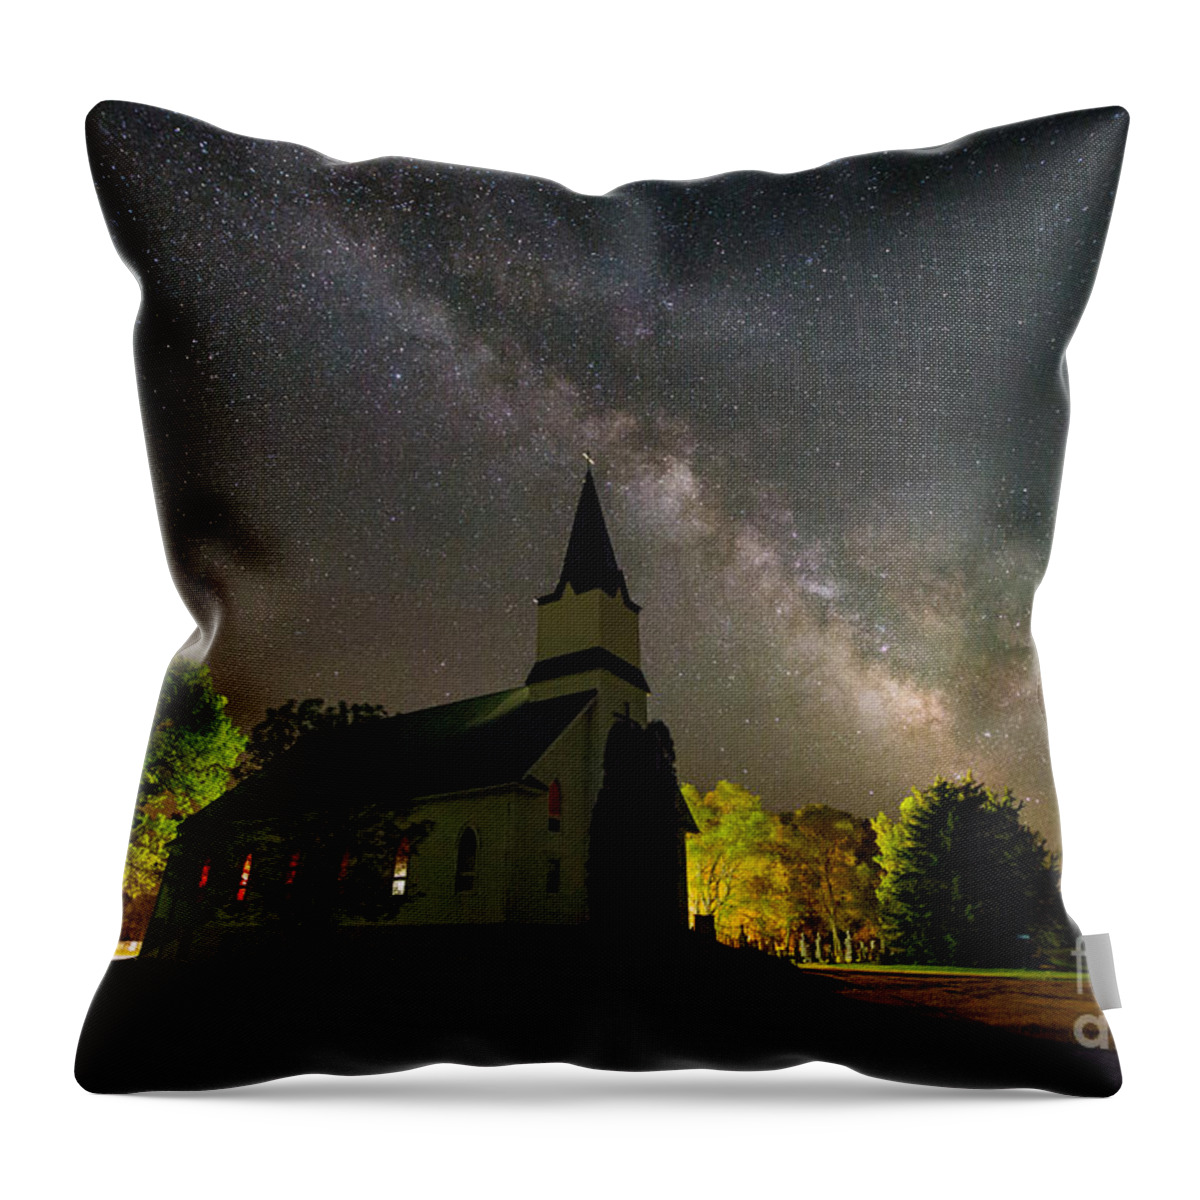 Milky Way Throw Pillow featuring the photograph Immanuel Milky Way by Aaron J Groen